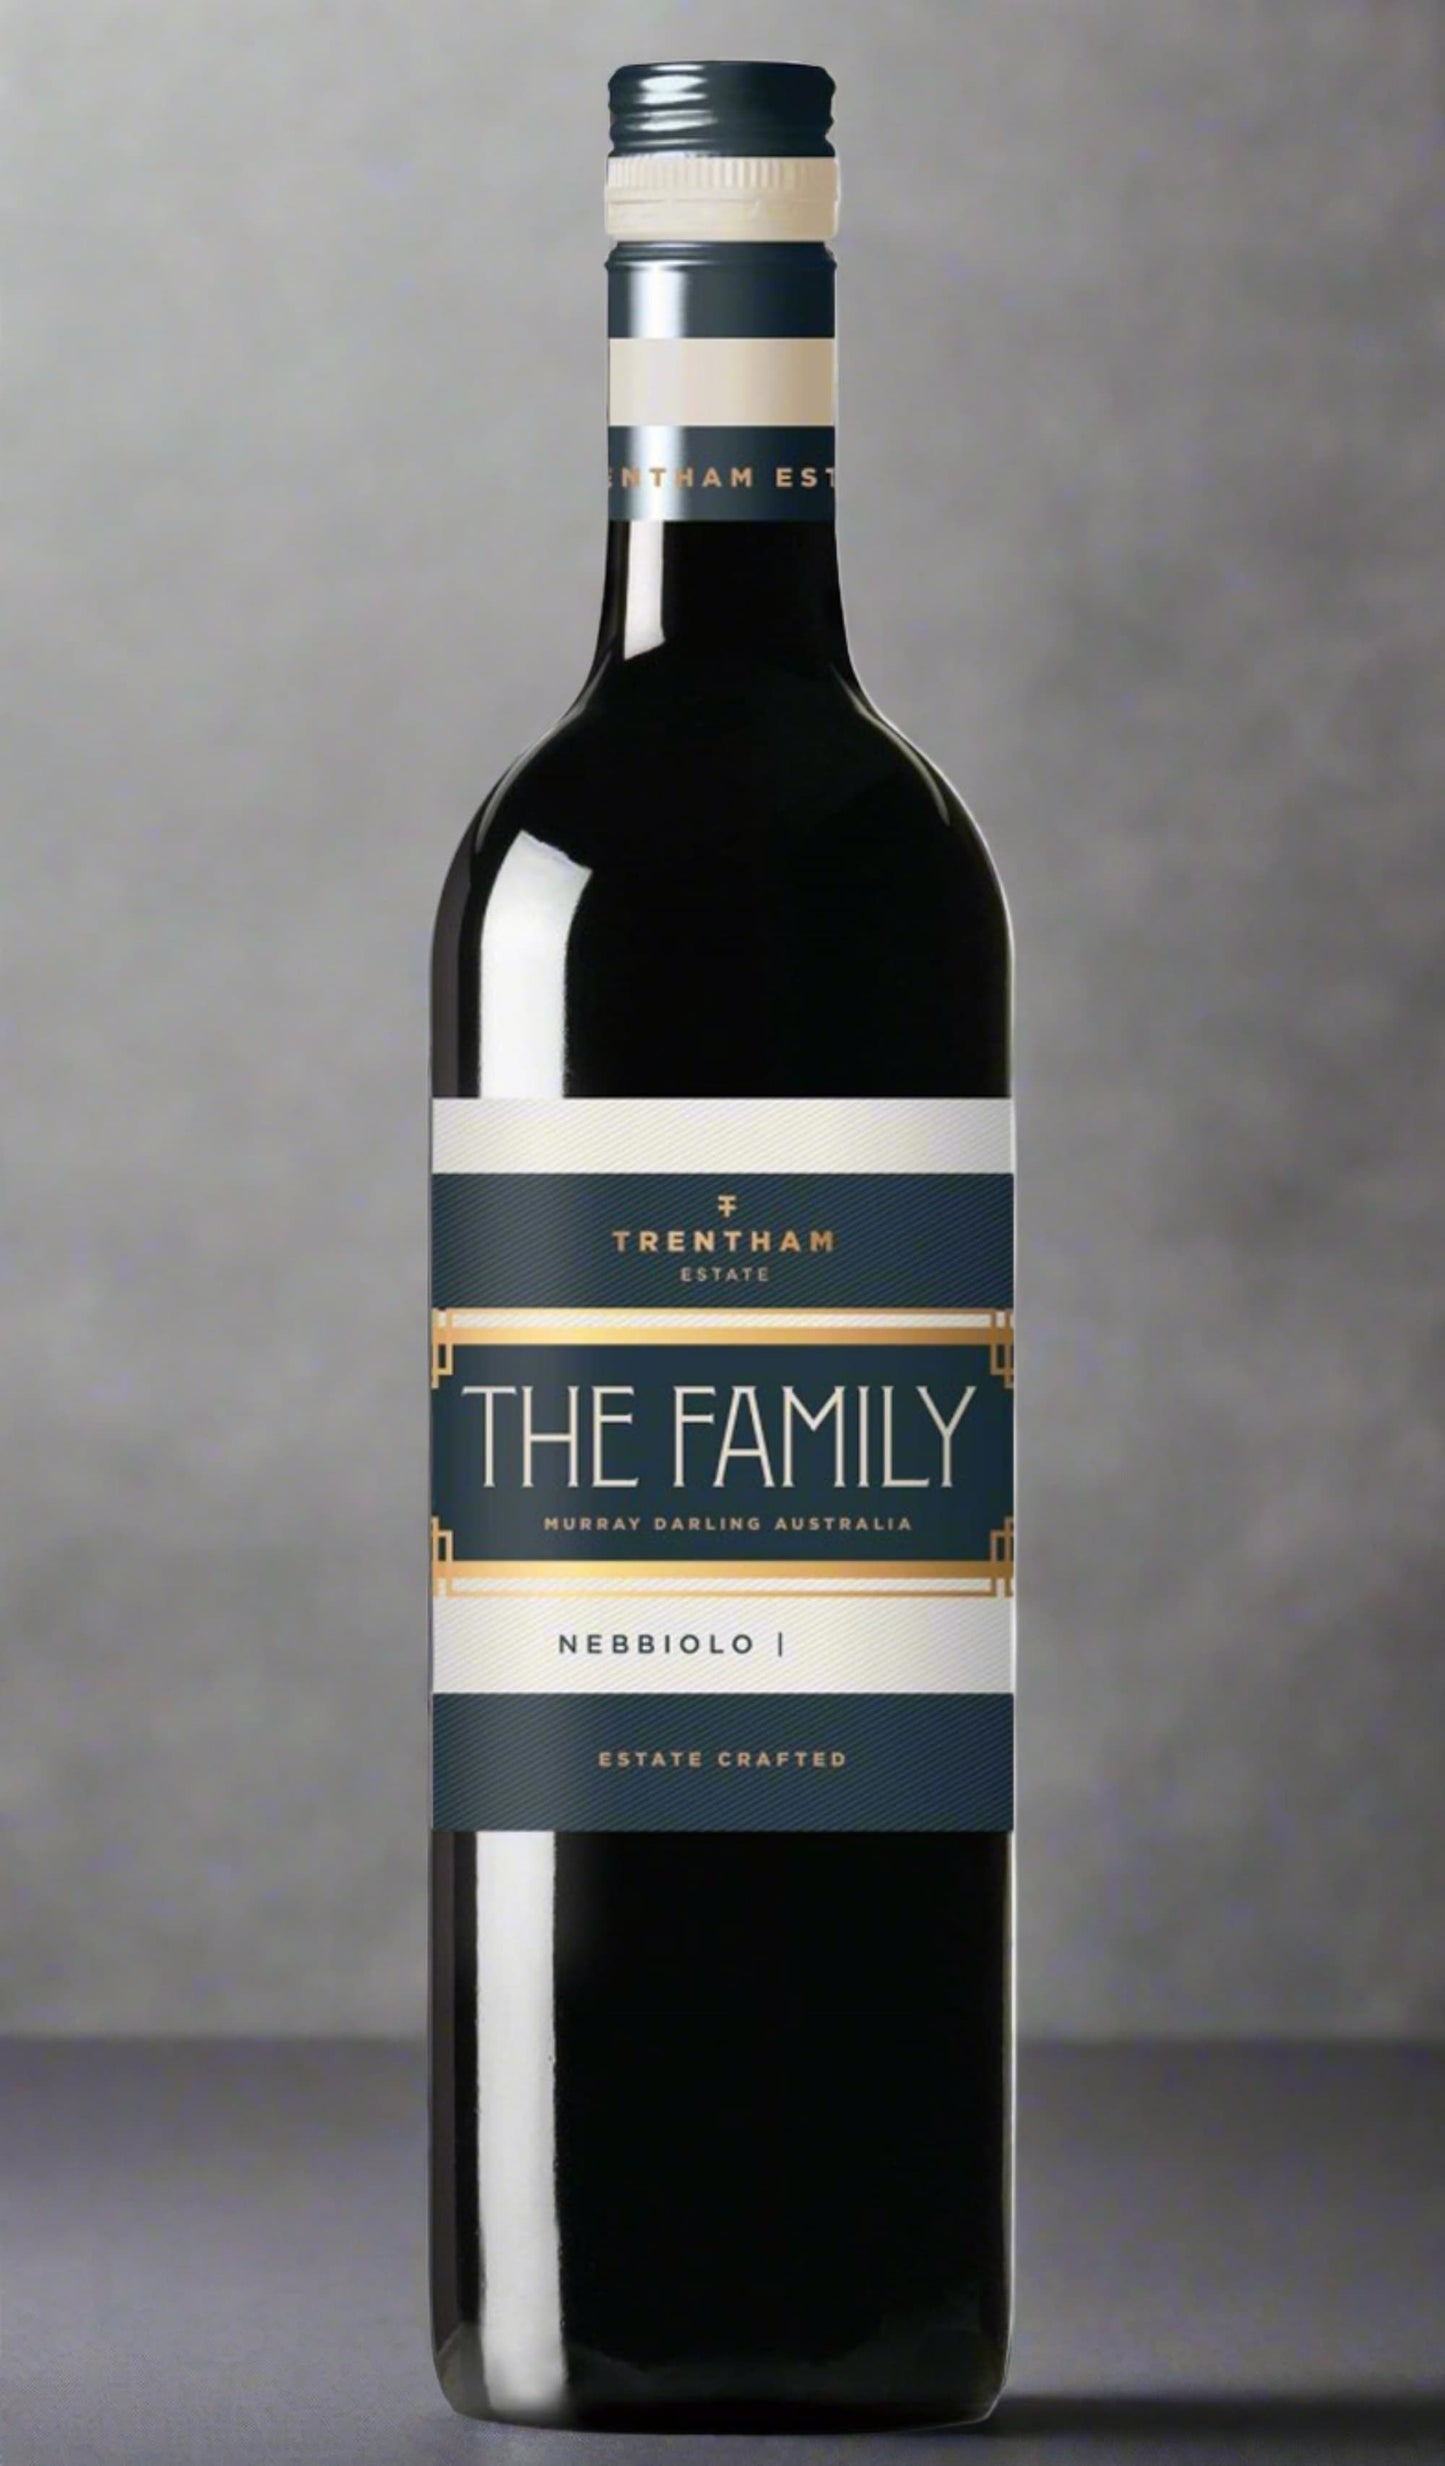 Find out more or buy Trentham Estate The Family Nebbiolo 2022 (Murray Darling) online at Wine Sellers Direct - Australia’s independent liquor specialists.